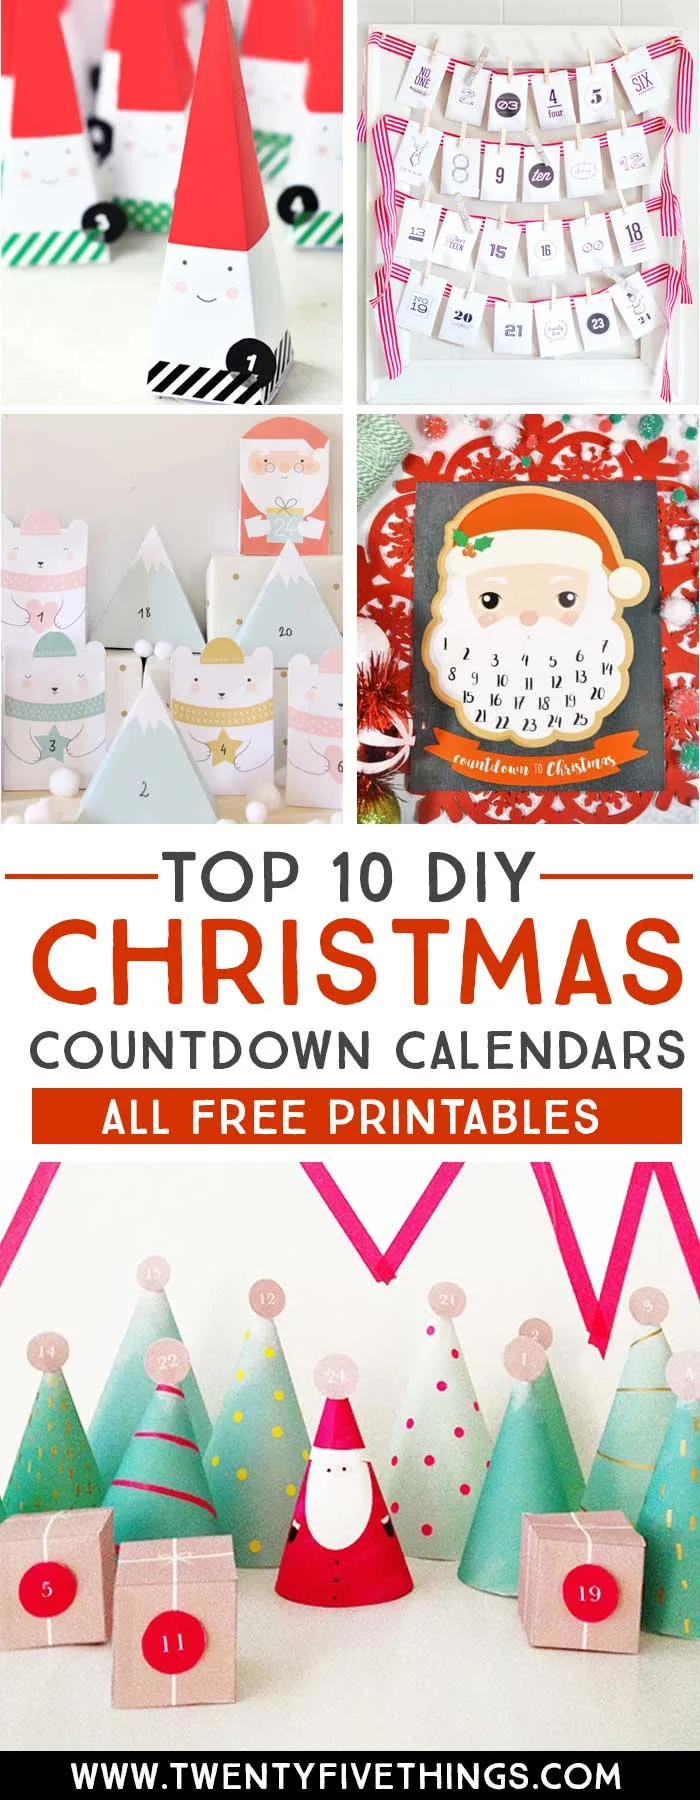 Check out our picks for the top 10 Free printable Christmas countdown advent calendars. All of these are budget friendly and super-easy to create for your own family. Click through to see all 10 DIY printable advent calendar ideas. #ChristmasCountdown #FreePrintables #DIYChristmas #AdventCalendars